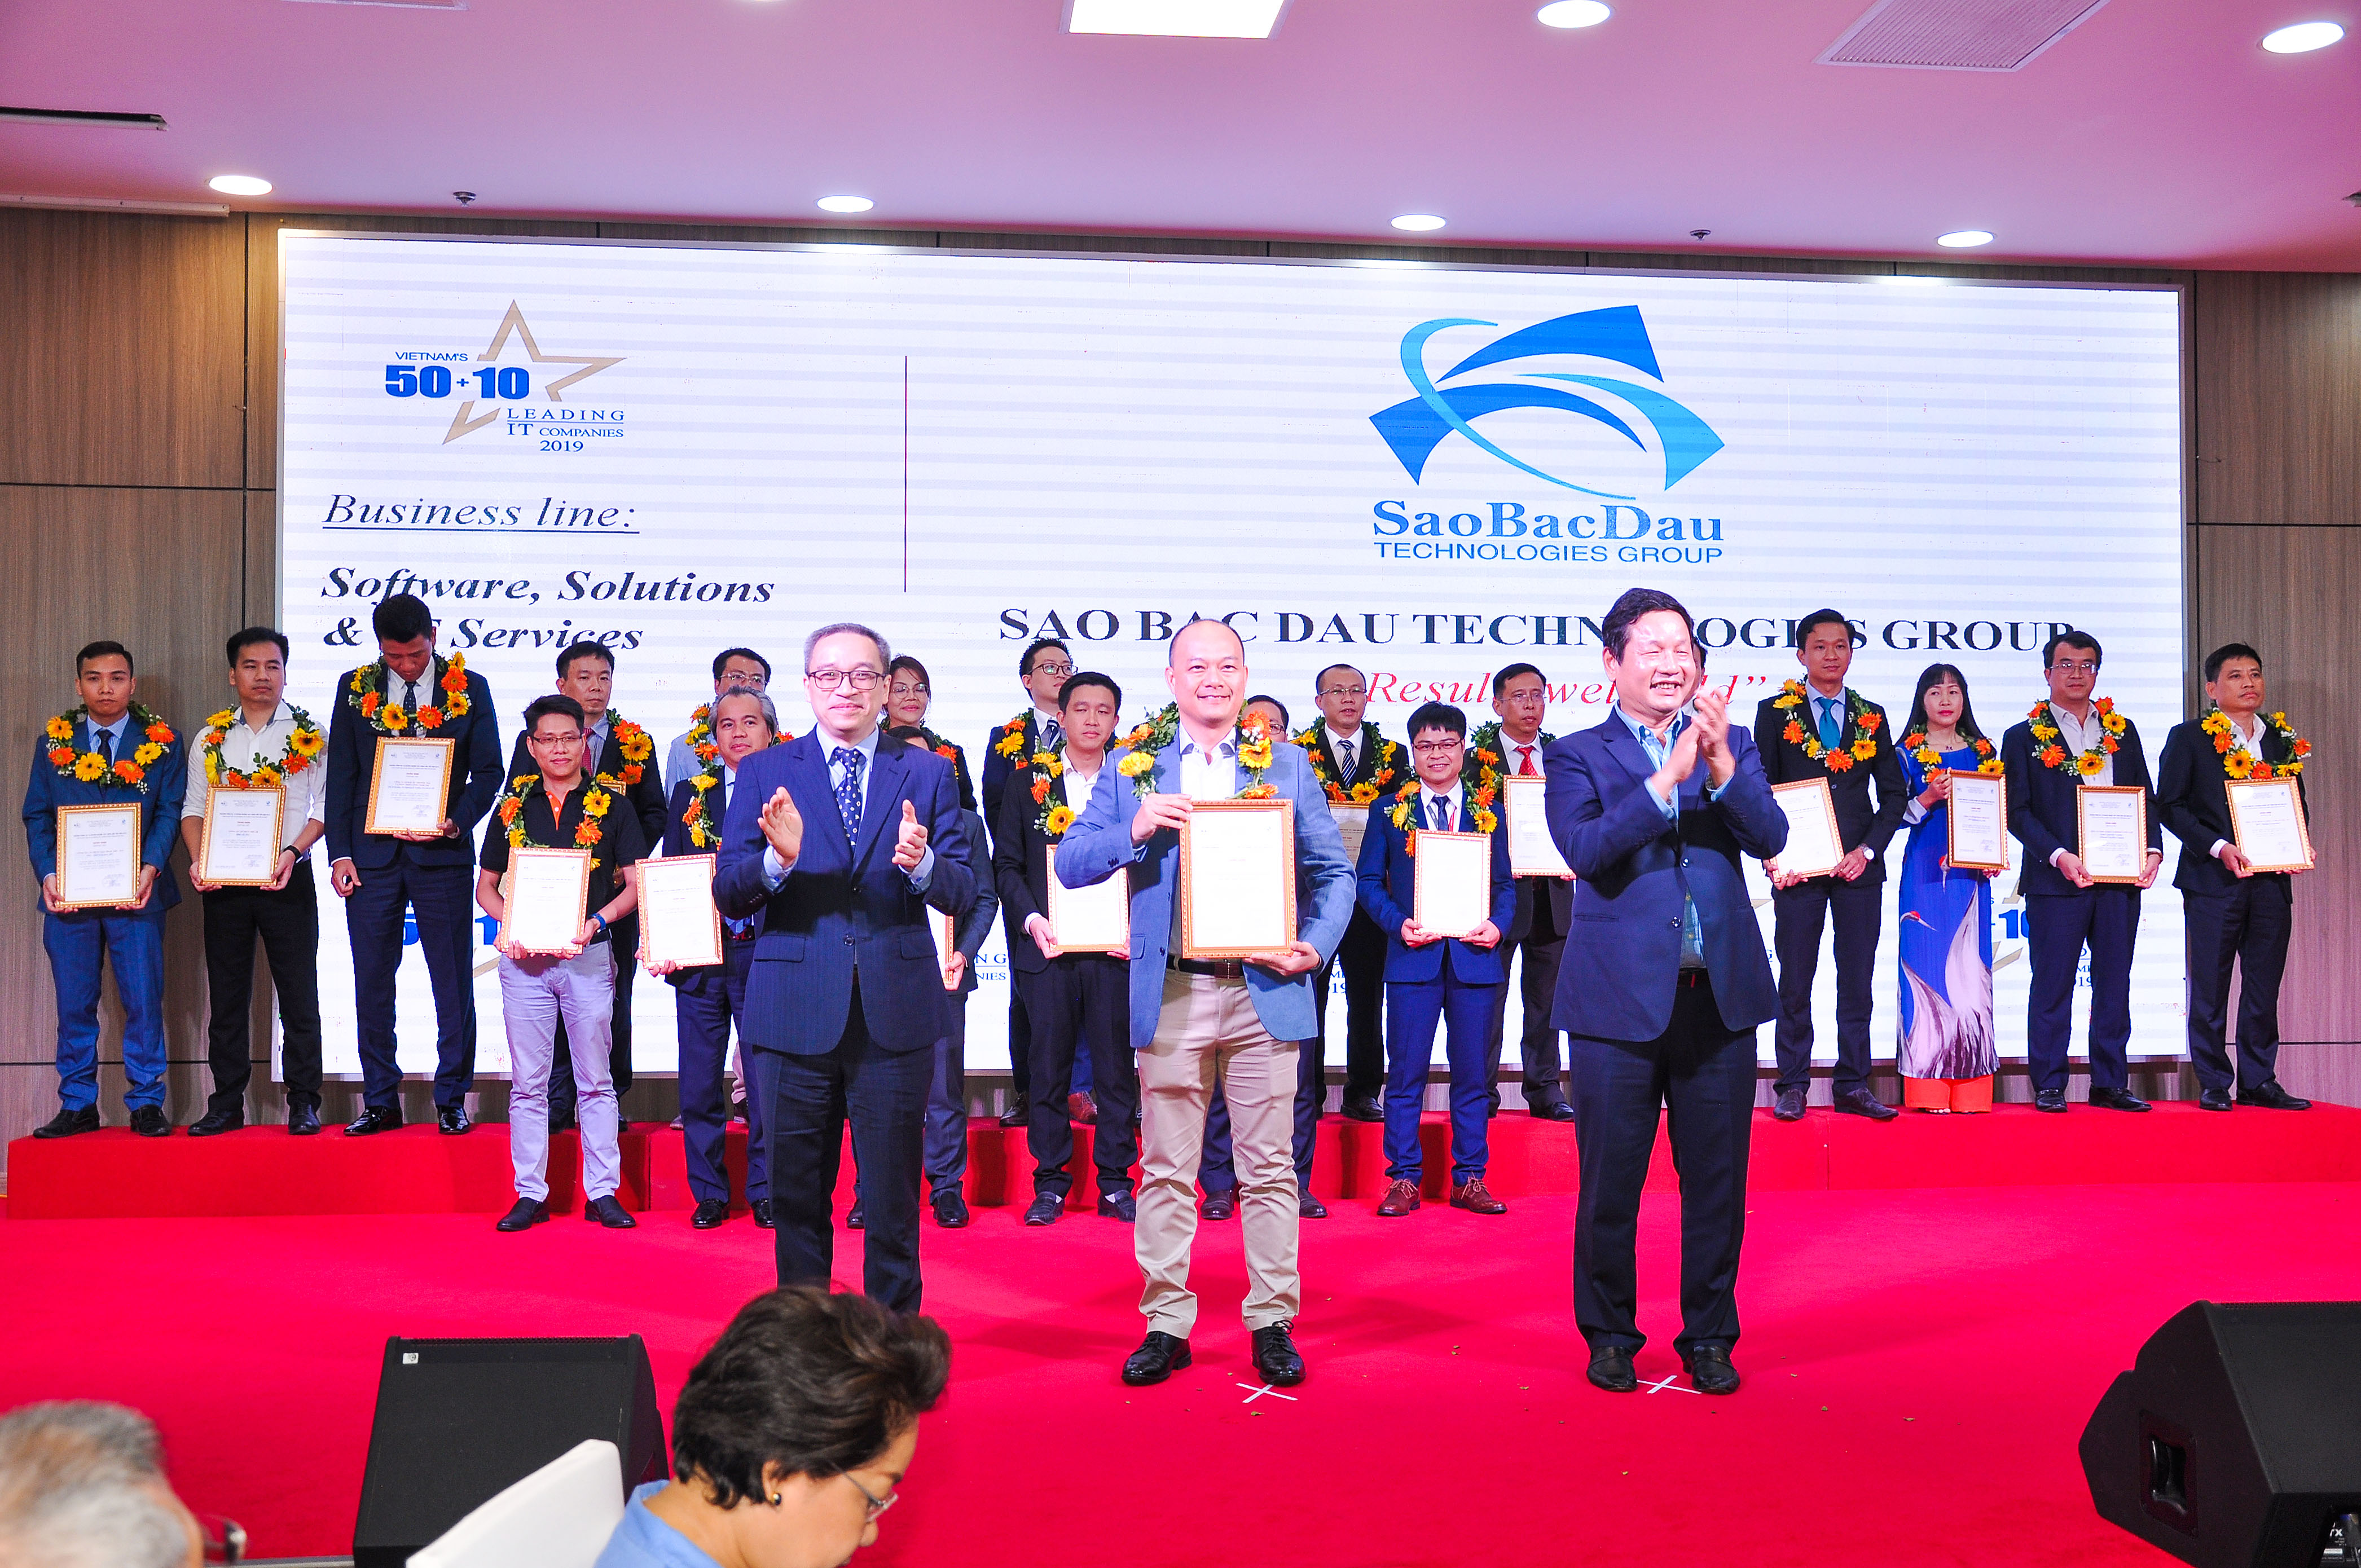 Sao Bac Dau continues to be honored in the Top 50 Vietnamese Leading IT Enterprises